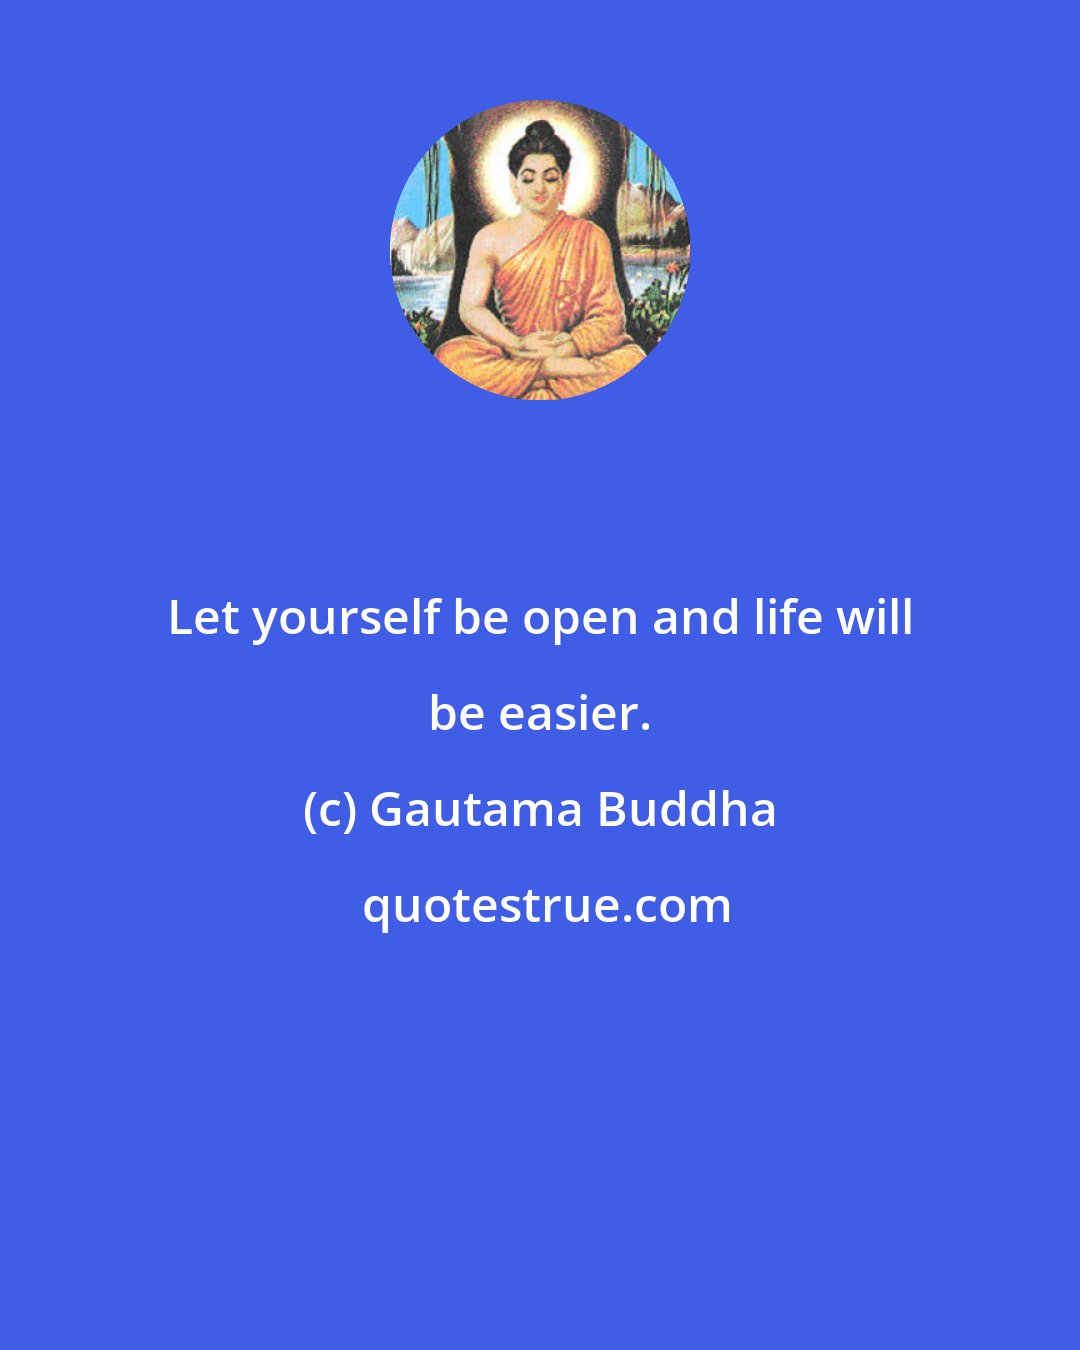 Gautama Buddha: Let yourself be open and life will be easier.